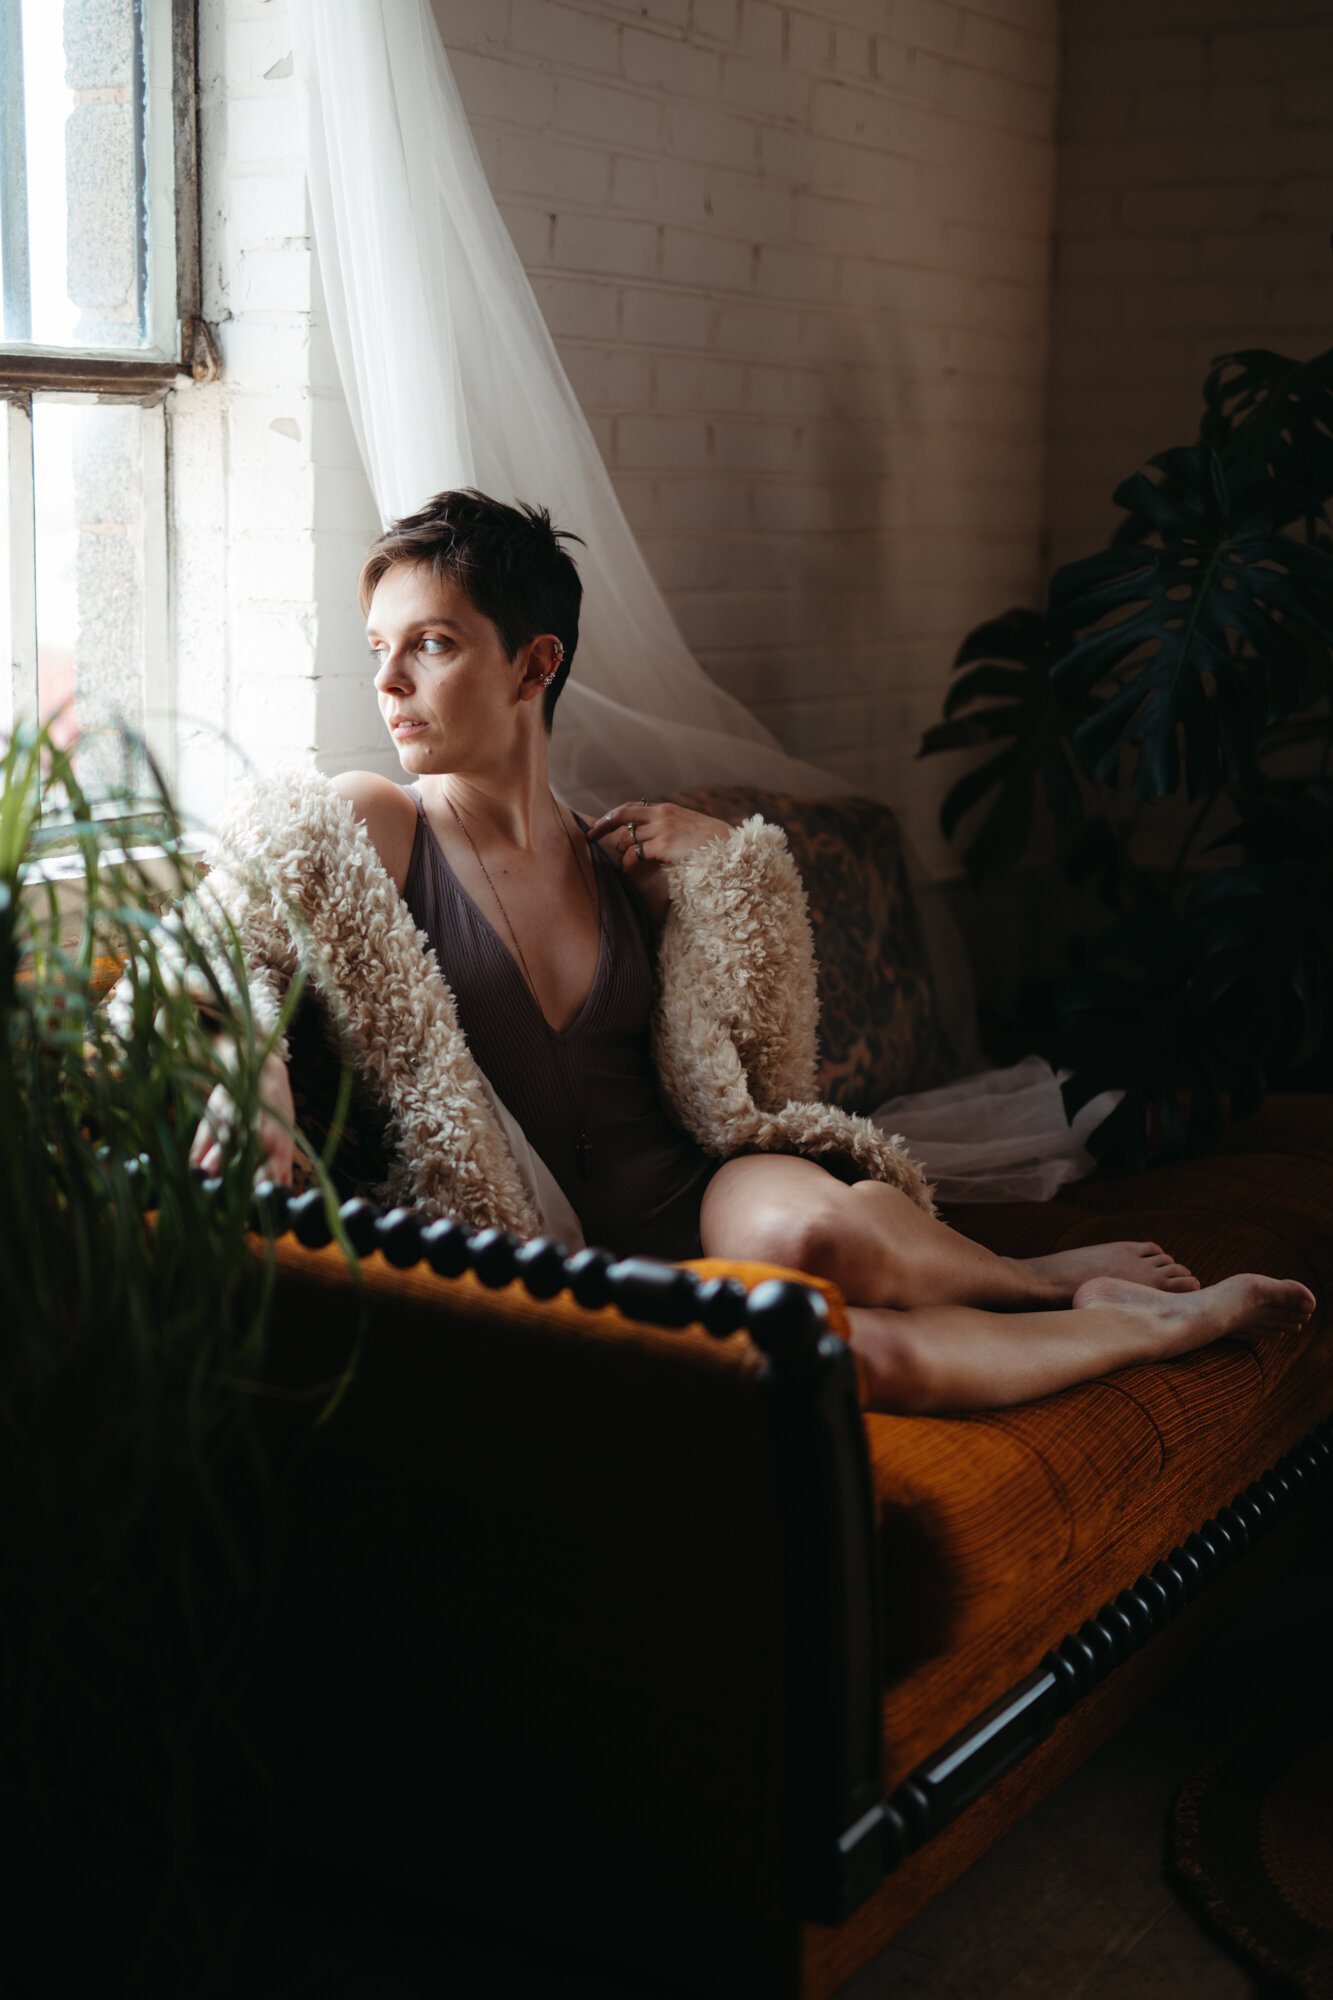 70's style boudoir photo of a person with short brown hair wearing a fuzzy coat sitting on a dark orange and brown couch.